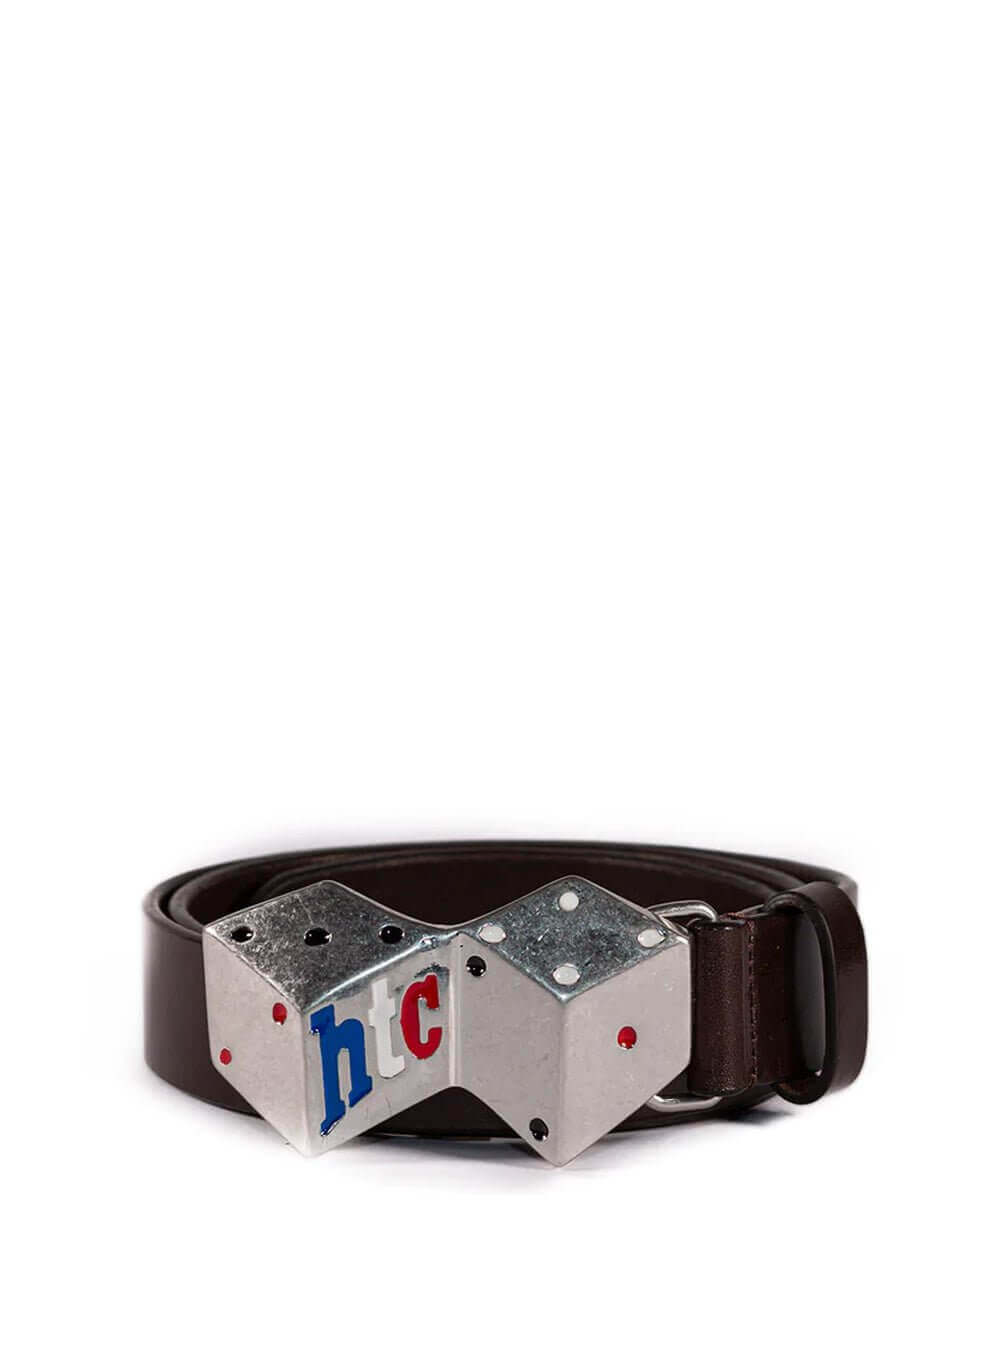 DICES BELT Leather belt with dices shaped buckle. Made in Italy HTC LOS ANGELES